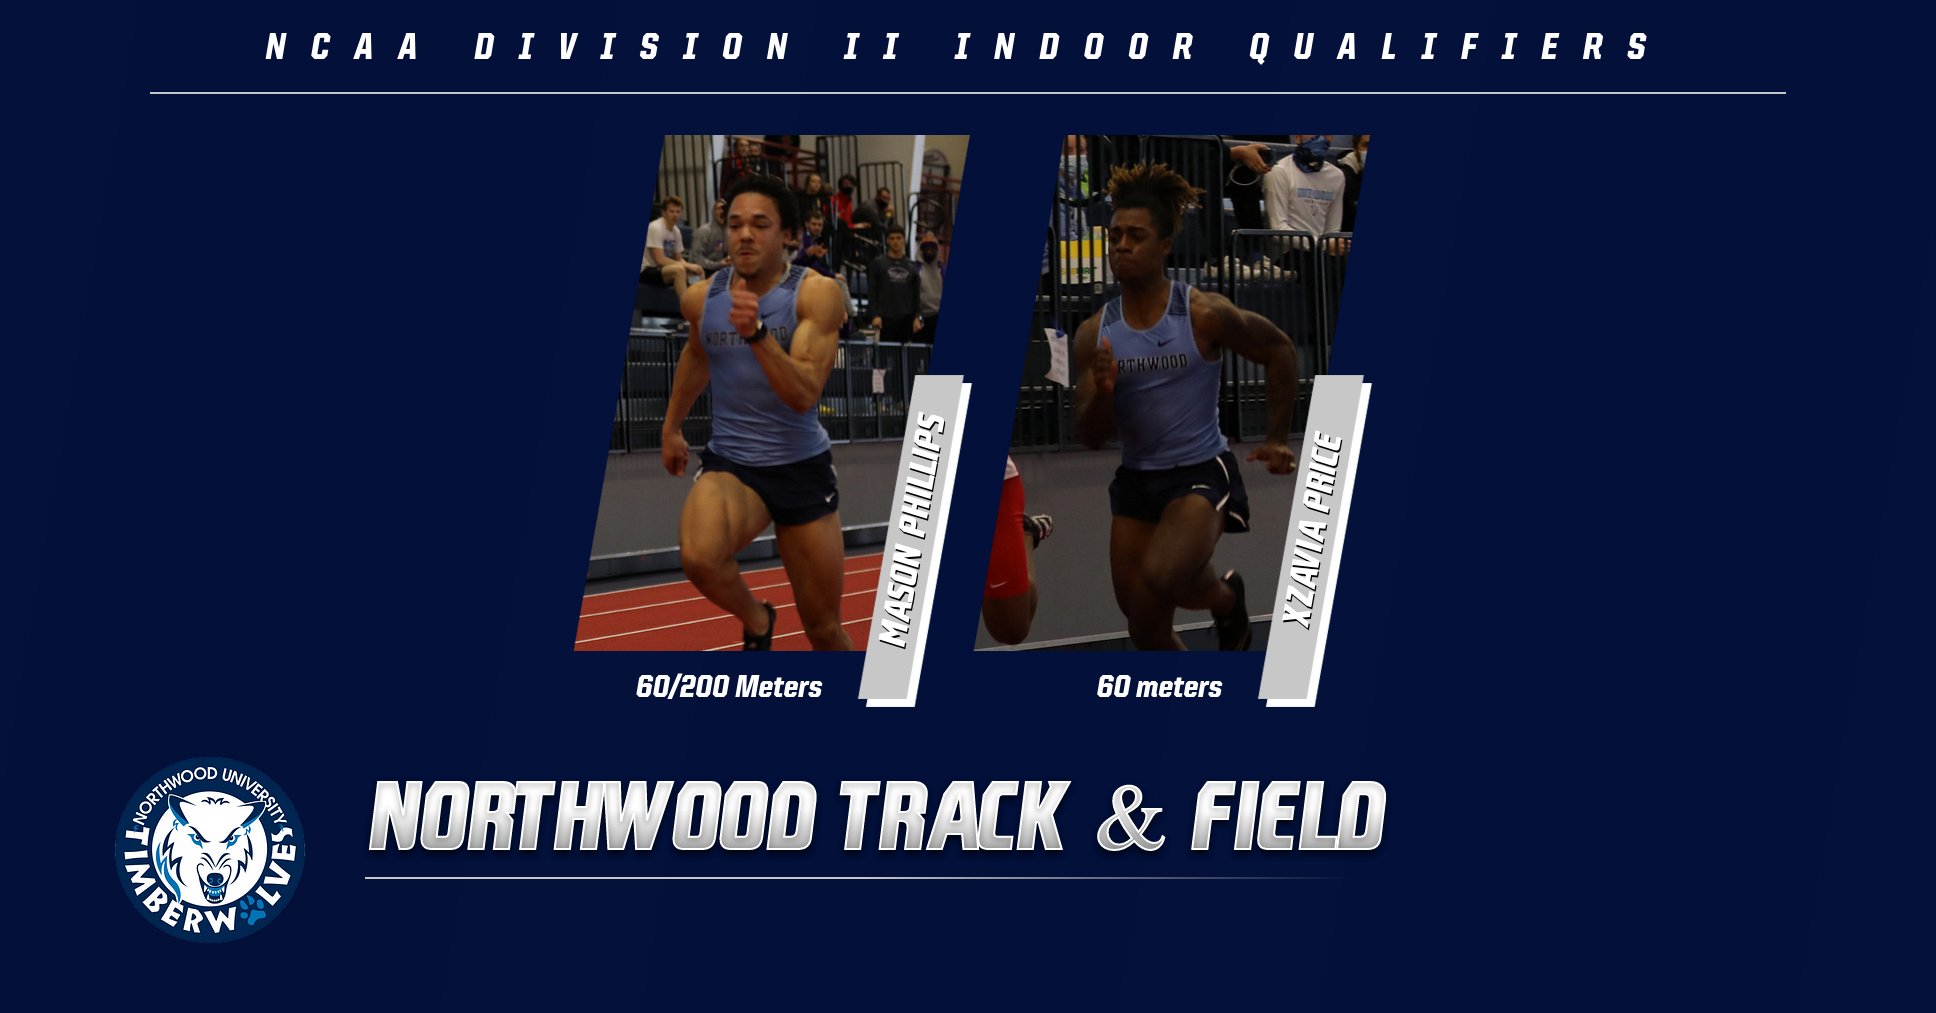 Mason Phillips and Xzavia Price To Compete At NCAA Division II Indoor Track & Field Championship